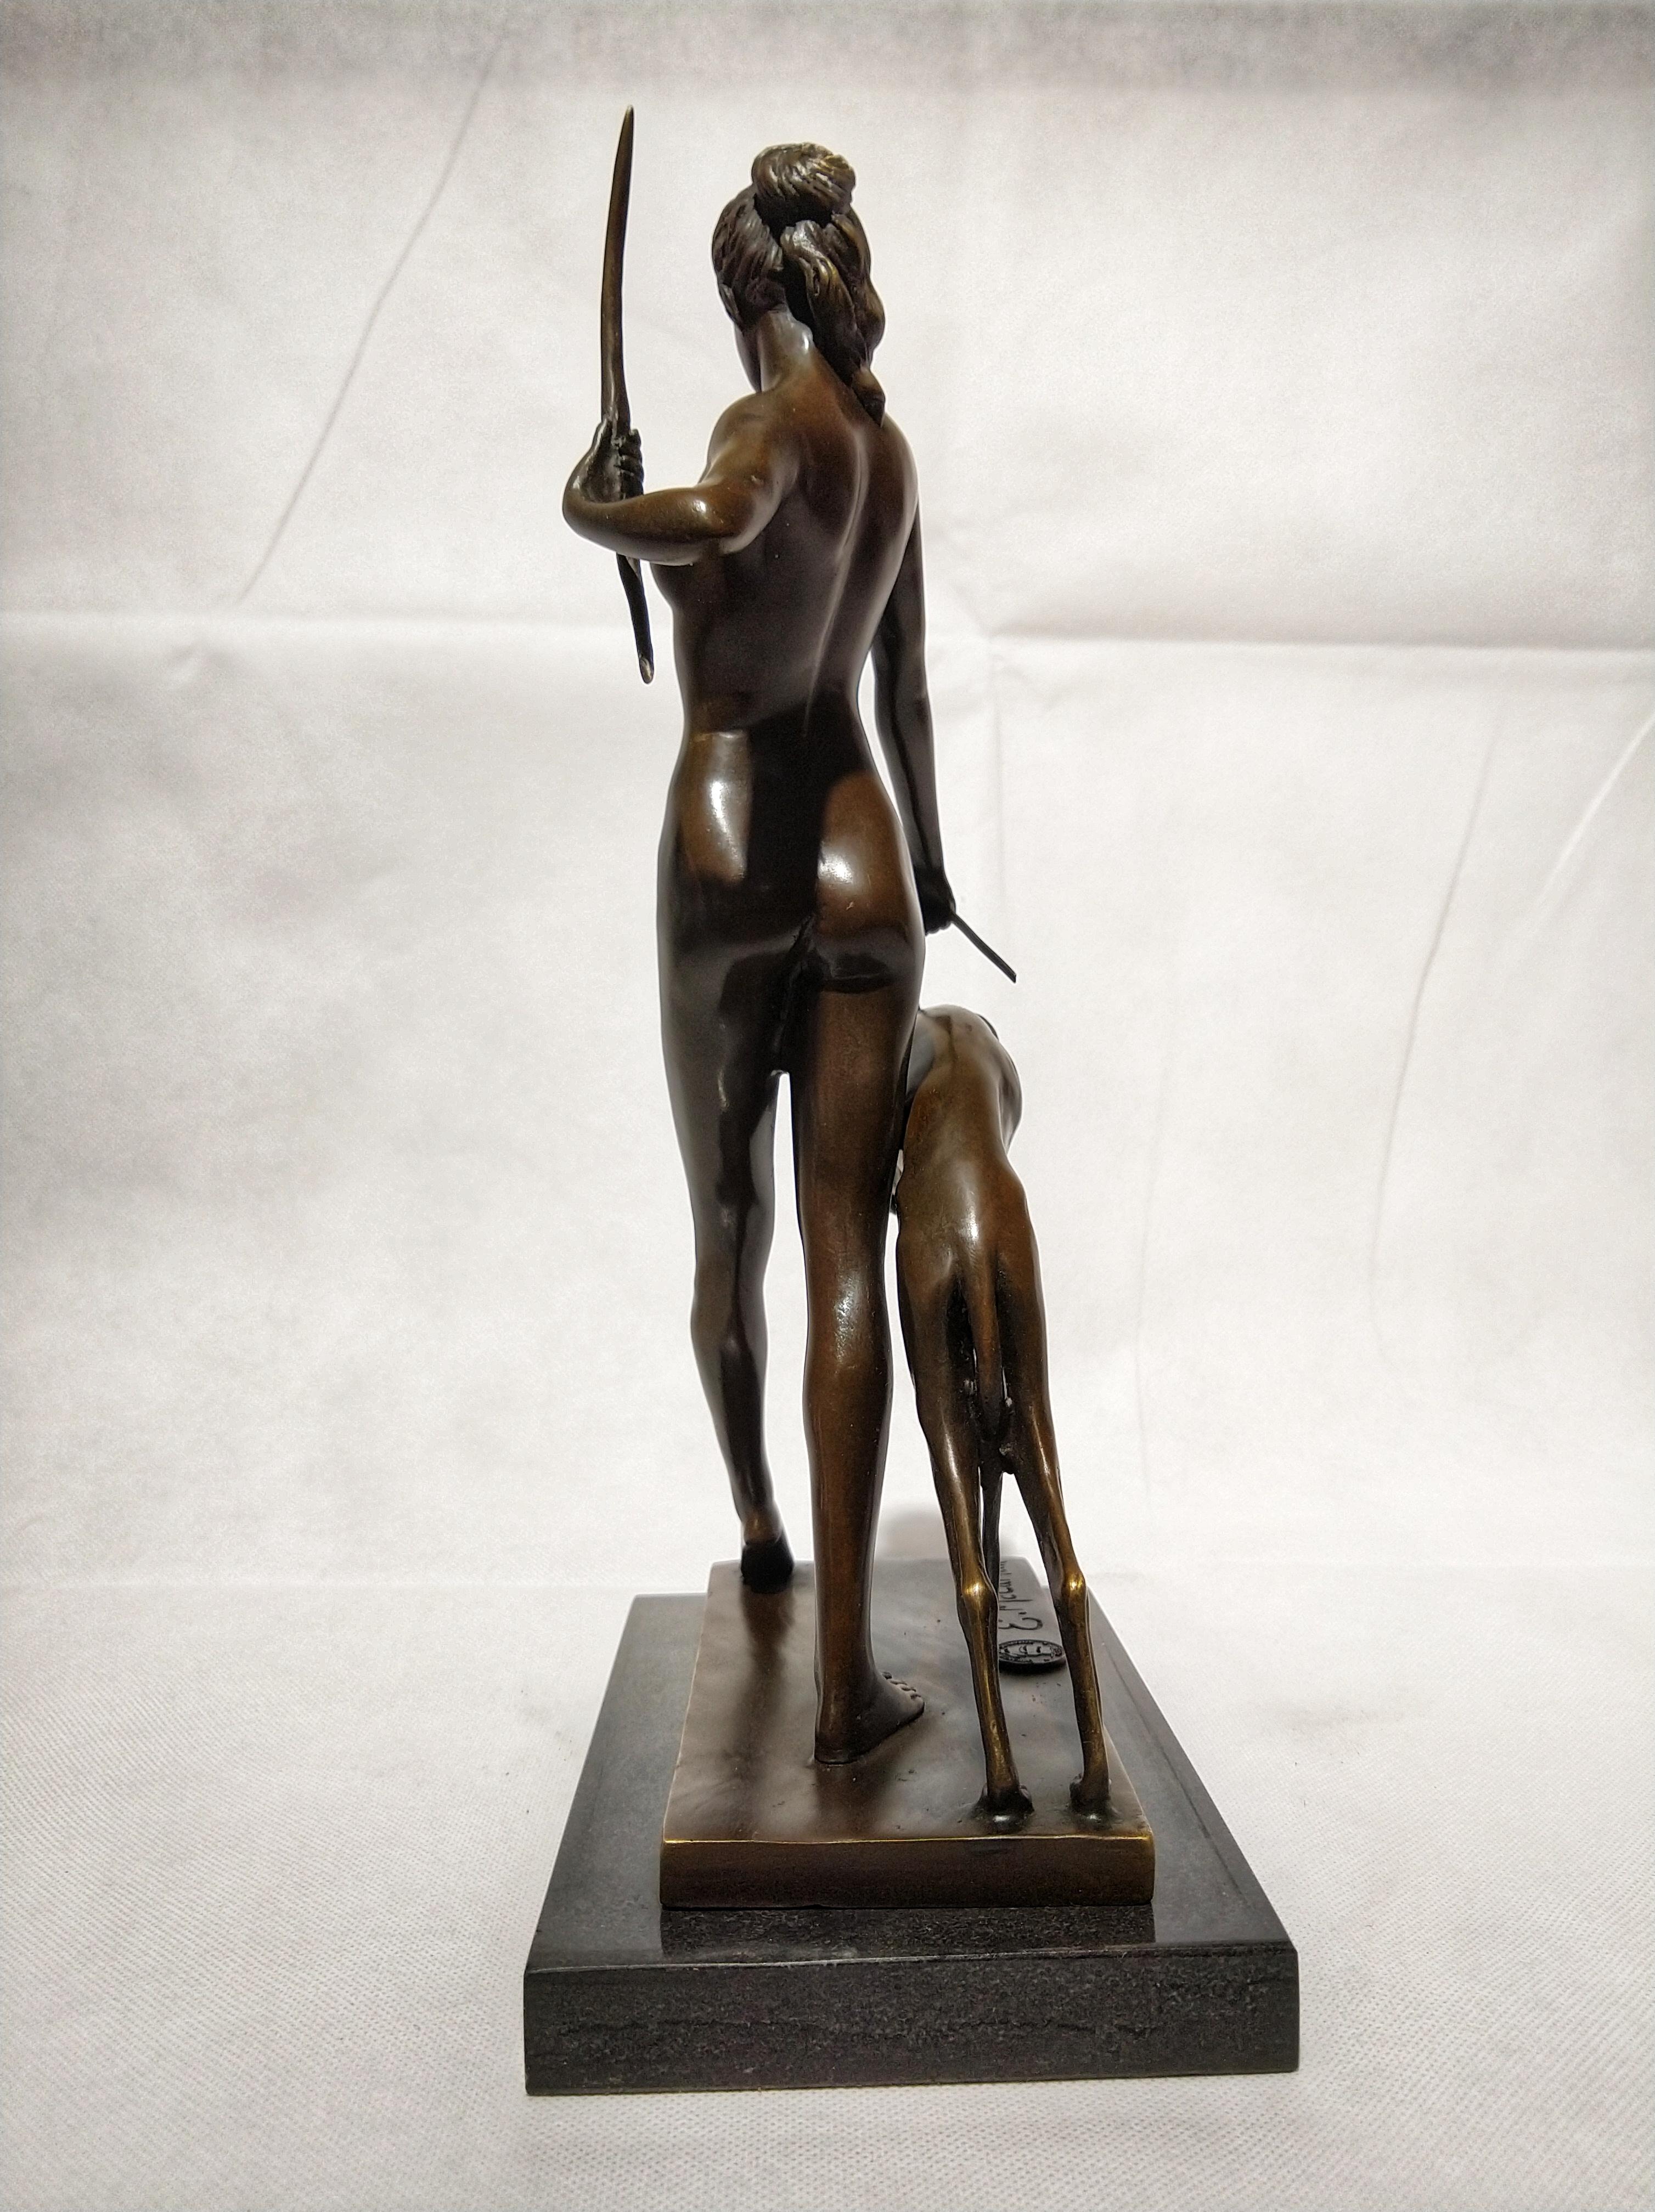 French 20th Century Art Deco Sculpture Figure Plum Bronze Diana Goddess of Hunting For Sale